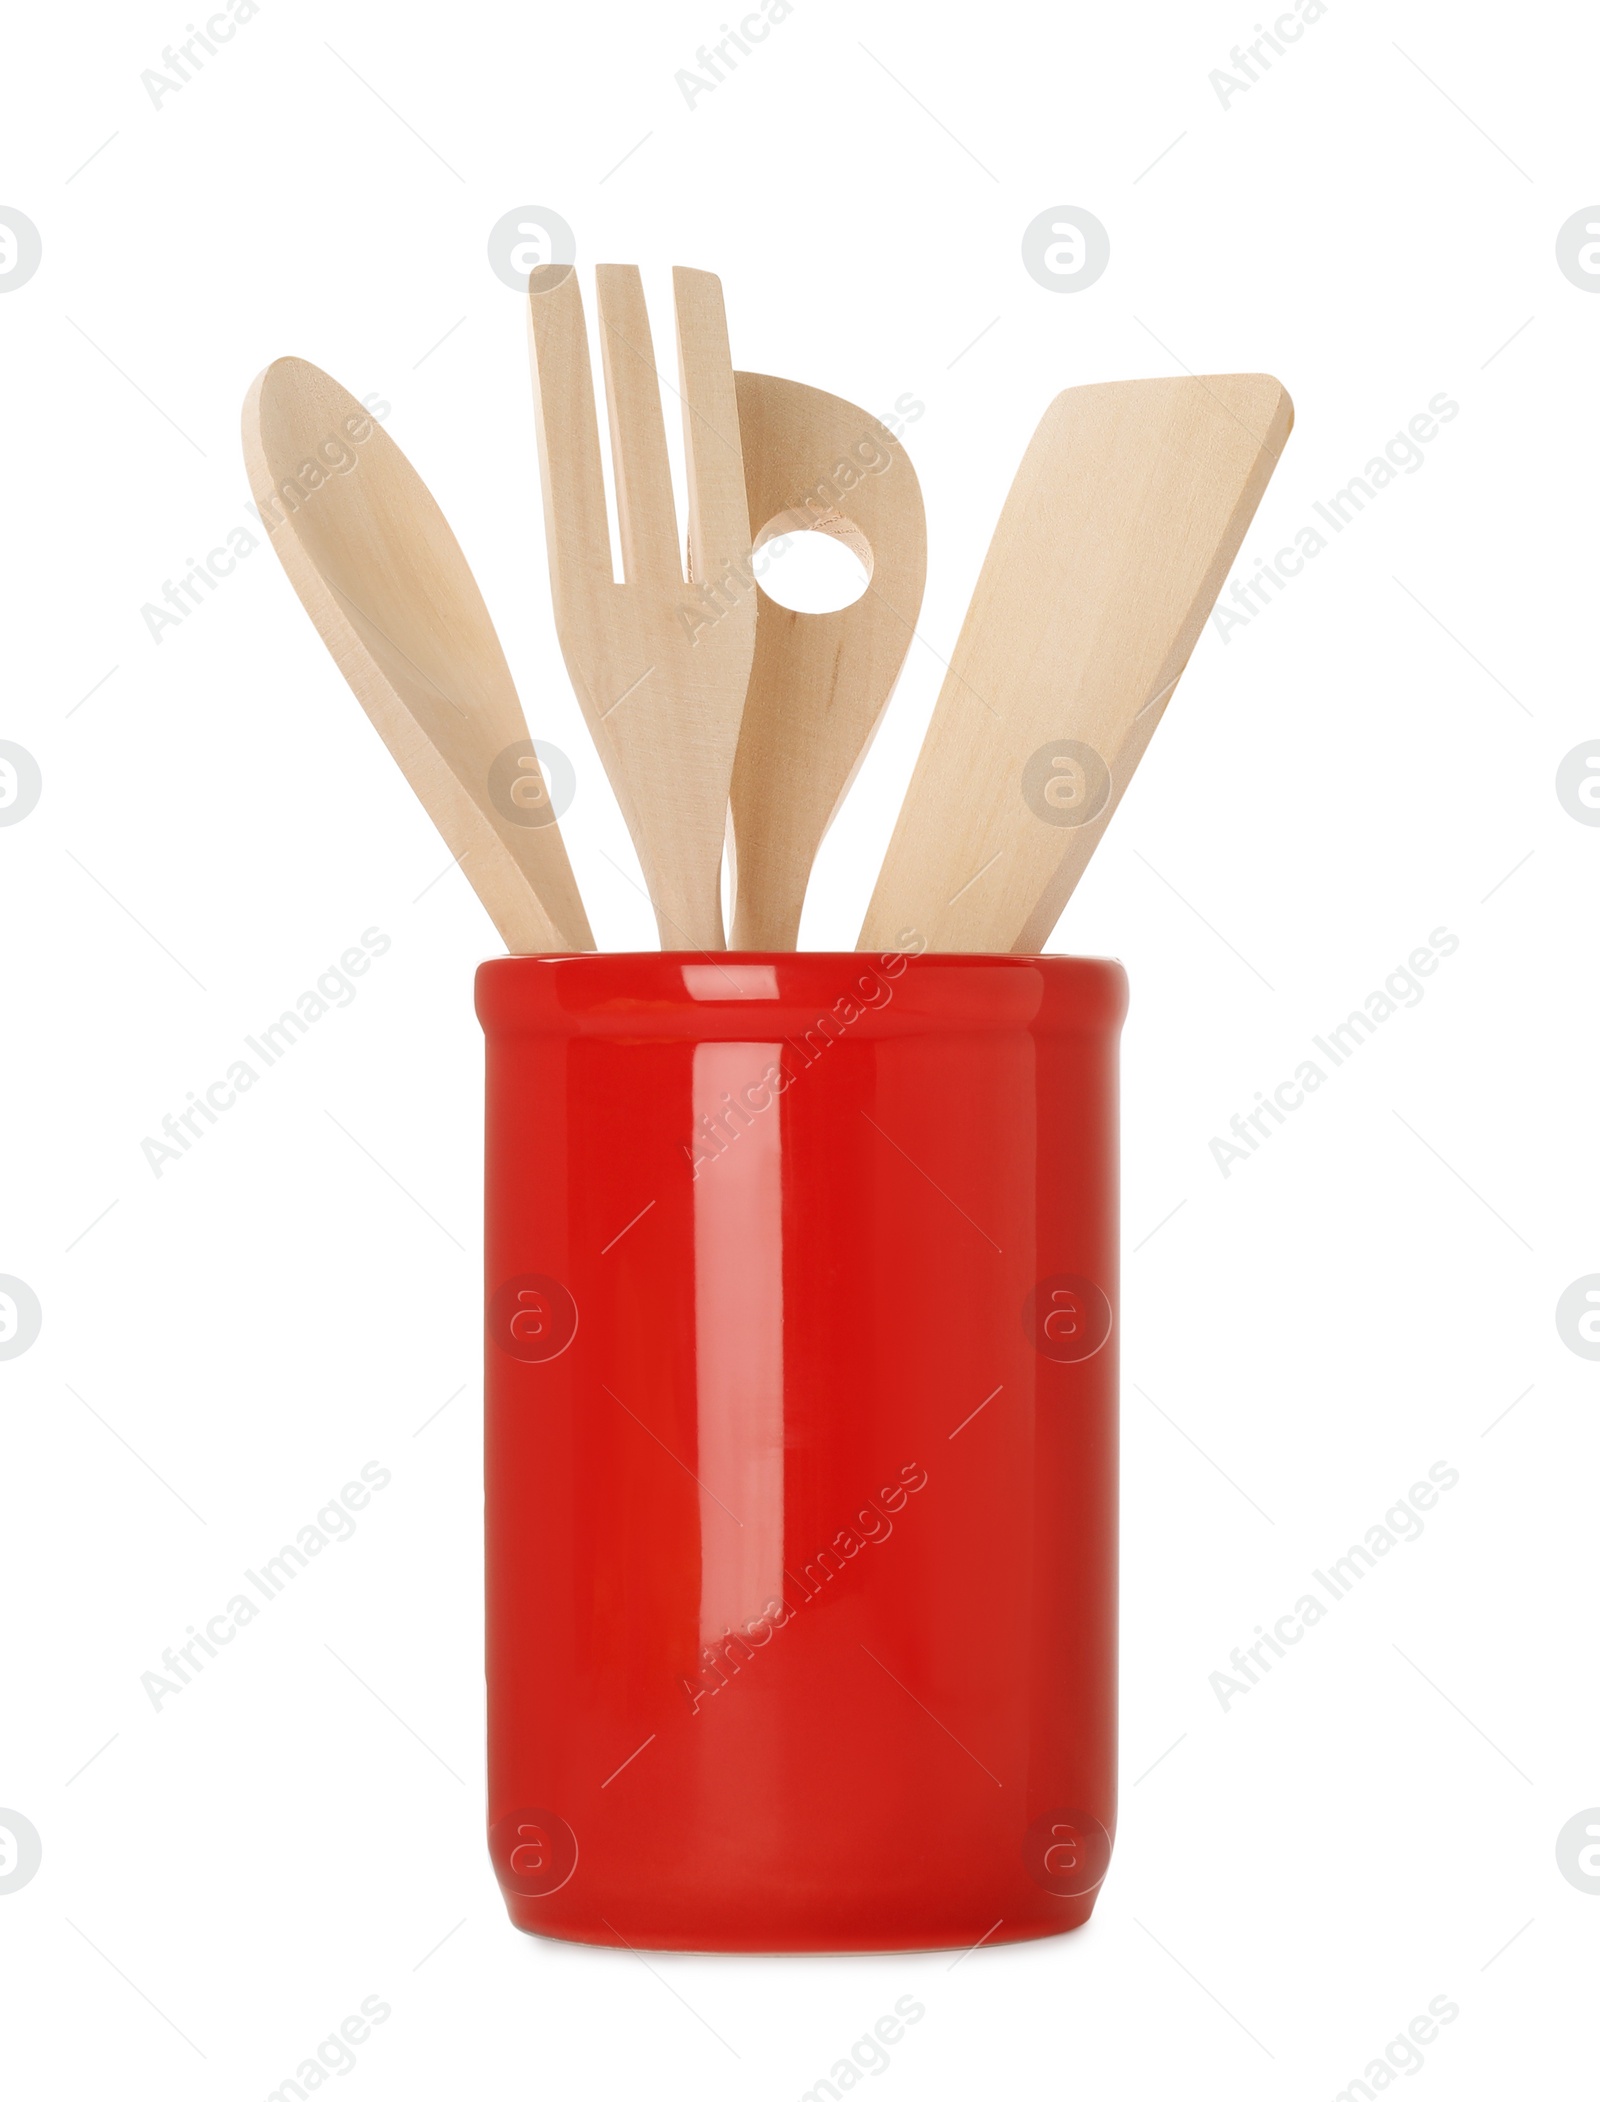 Photo of Set of kitchen utensils in red holder isolated on white